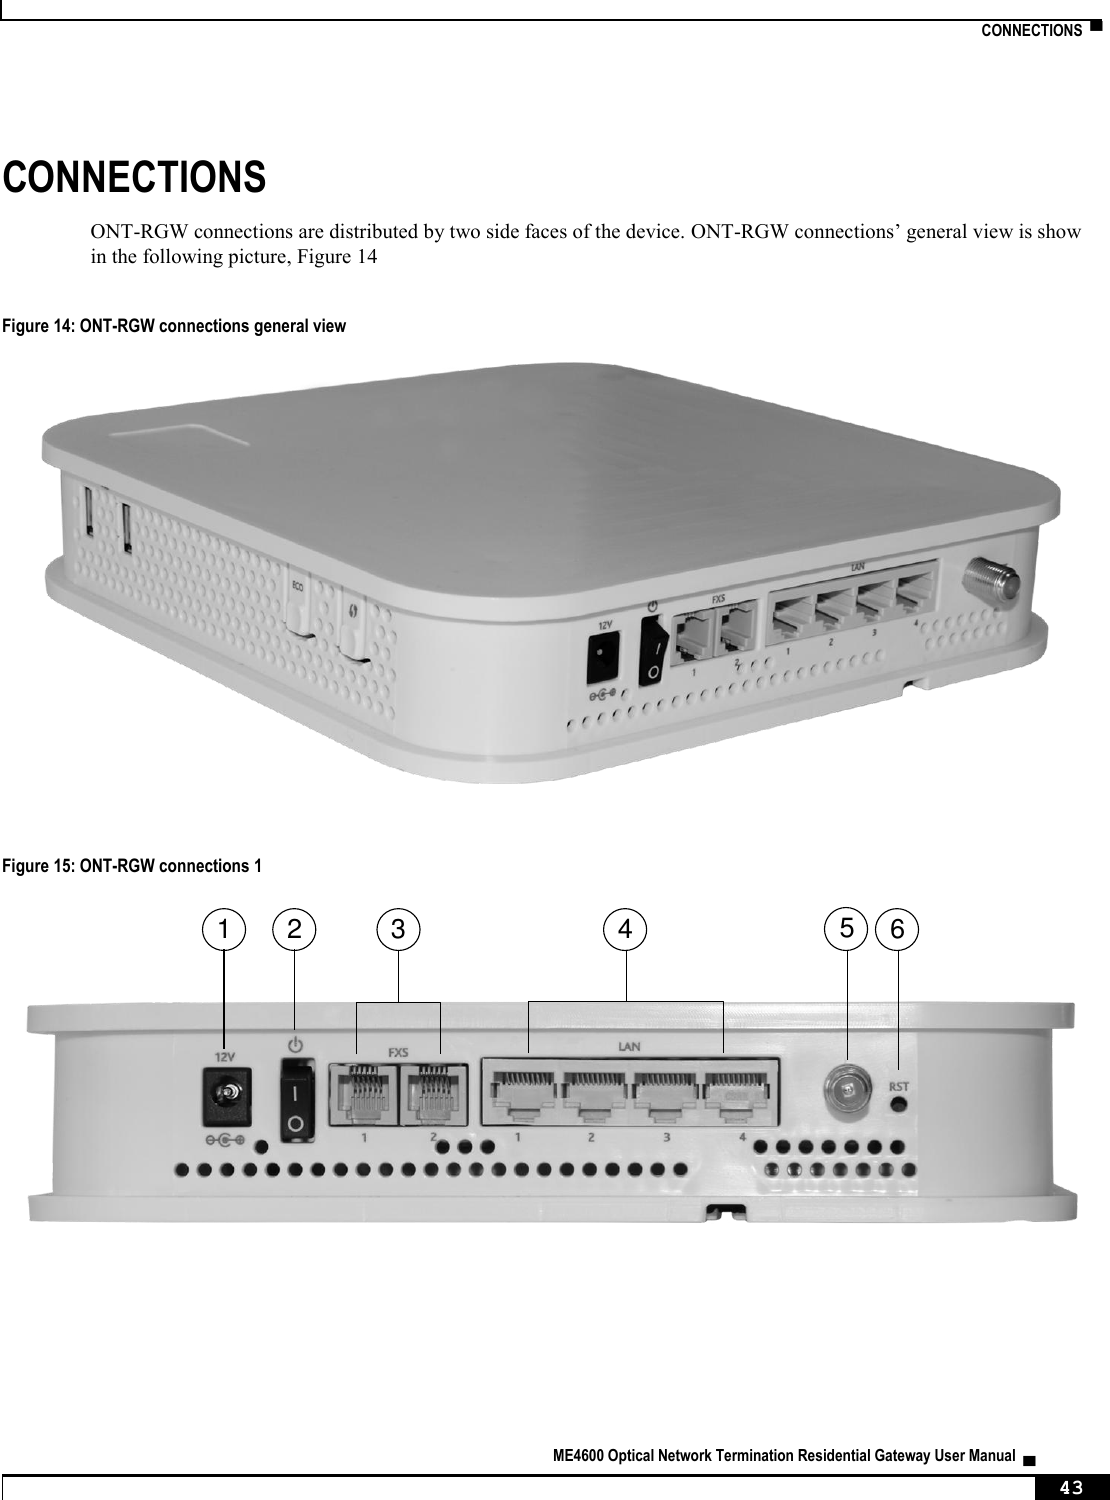    CONNECTIONS  ▀   ME4600 Optical Network Termination Residential Gateway User Manual  ▄     43 CONNECTIONS ONT-RGW connections are distributed by two side faces of the device. ONT-RGW connections’ general view is show in the following picture, Figure 14  Figure 14: ONT-RGW connections general view    Figure 15: ONT-RGW connections 1    1 2 3 4 65